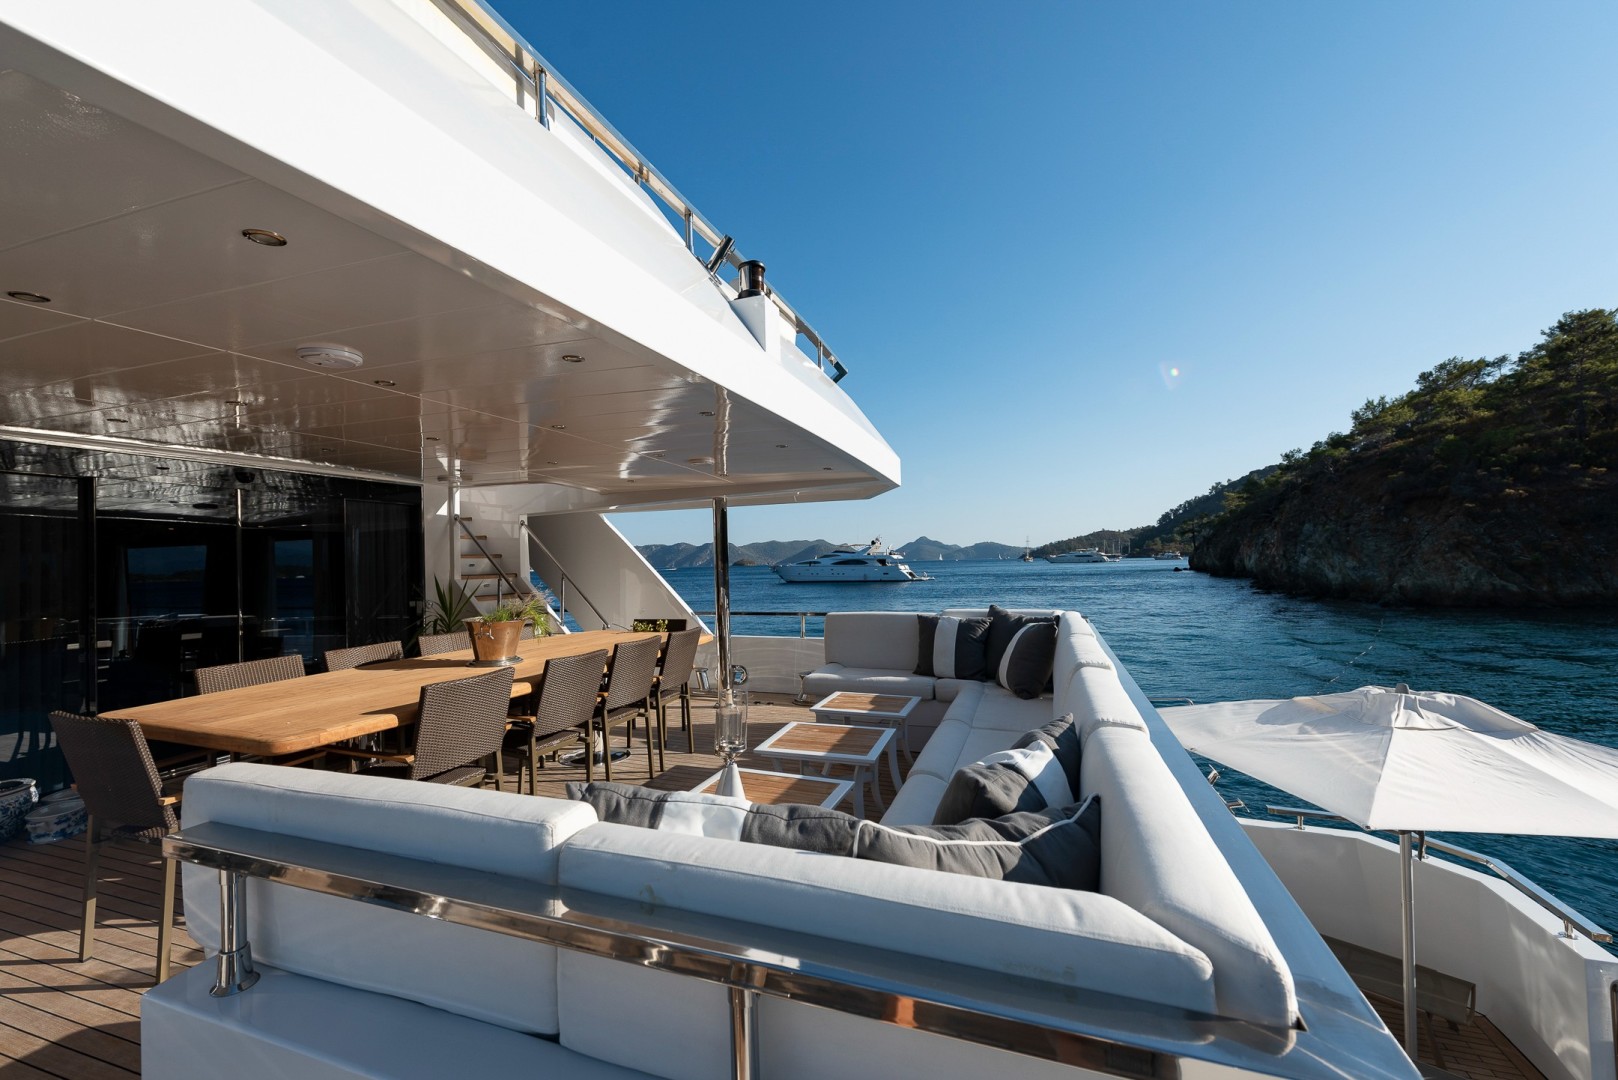 Main deck aft by day